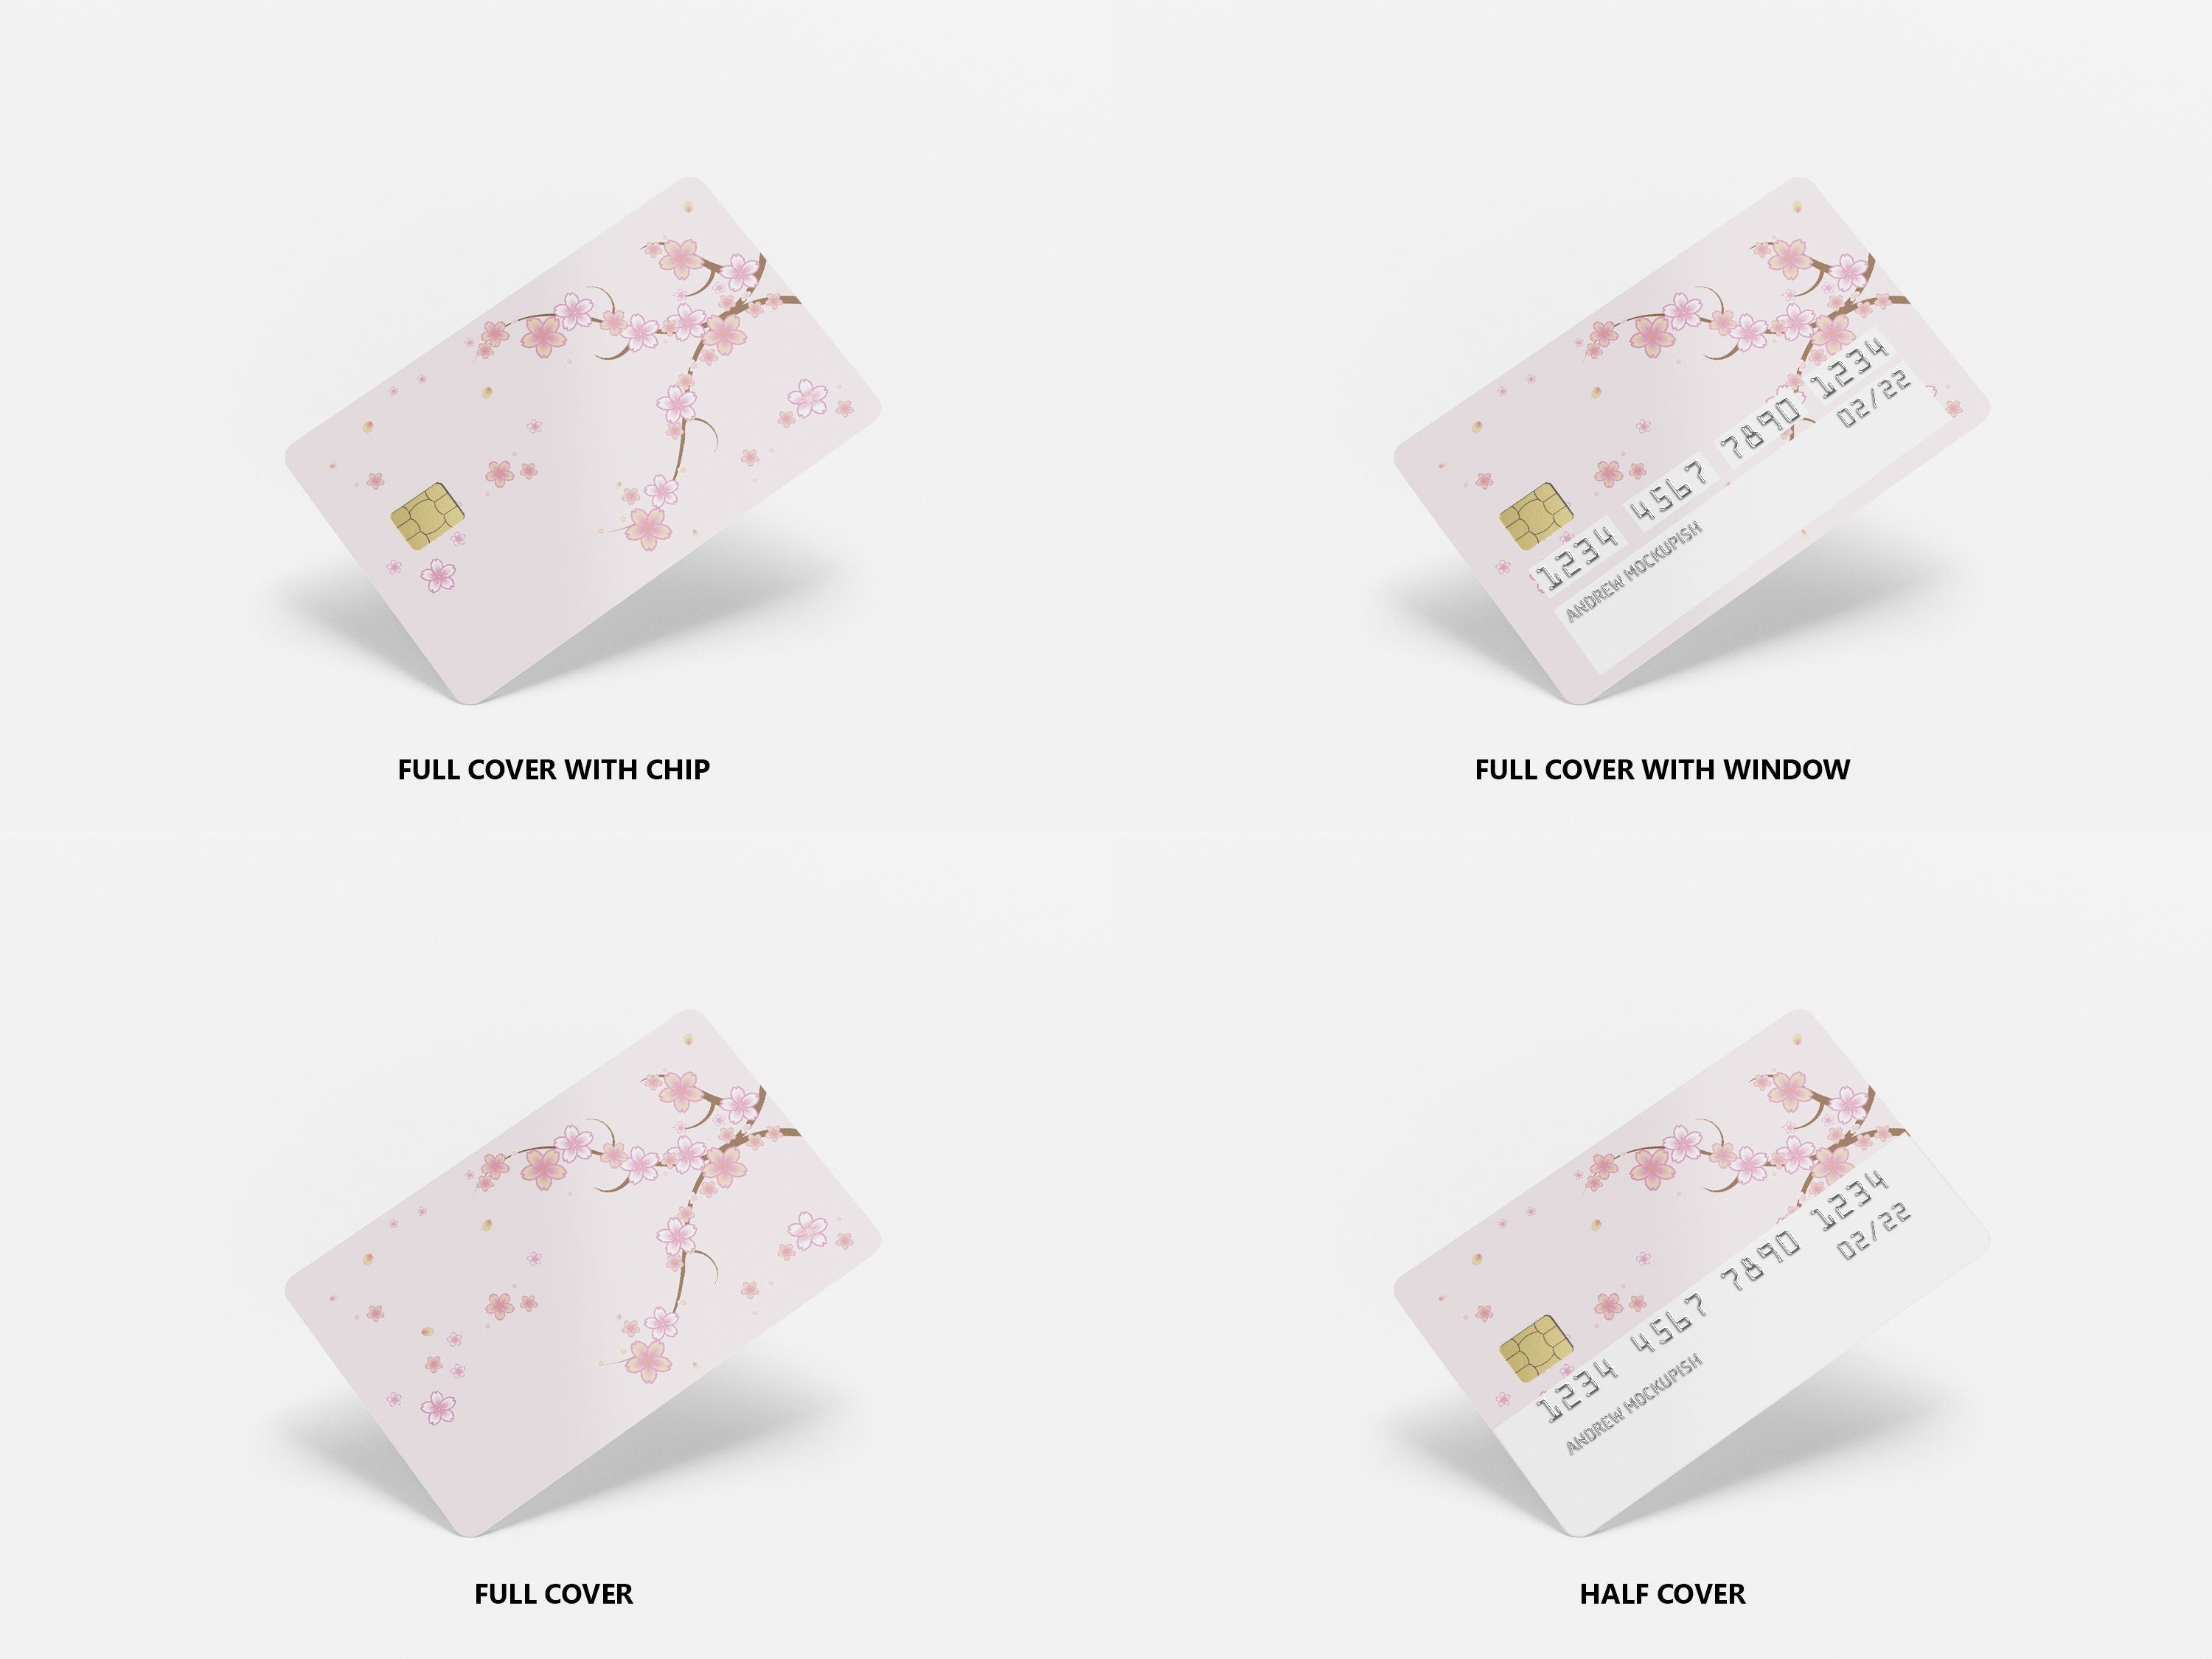  Cute Pink Flower Credit Card Stickers for Transportation, Key,  Debit, Credit, Card Cover No Bubble, Slim, Waterproof, Anti-Wrinkling  Removable Vinyl Bank Card Skin : Office Products